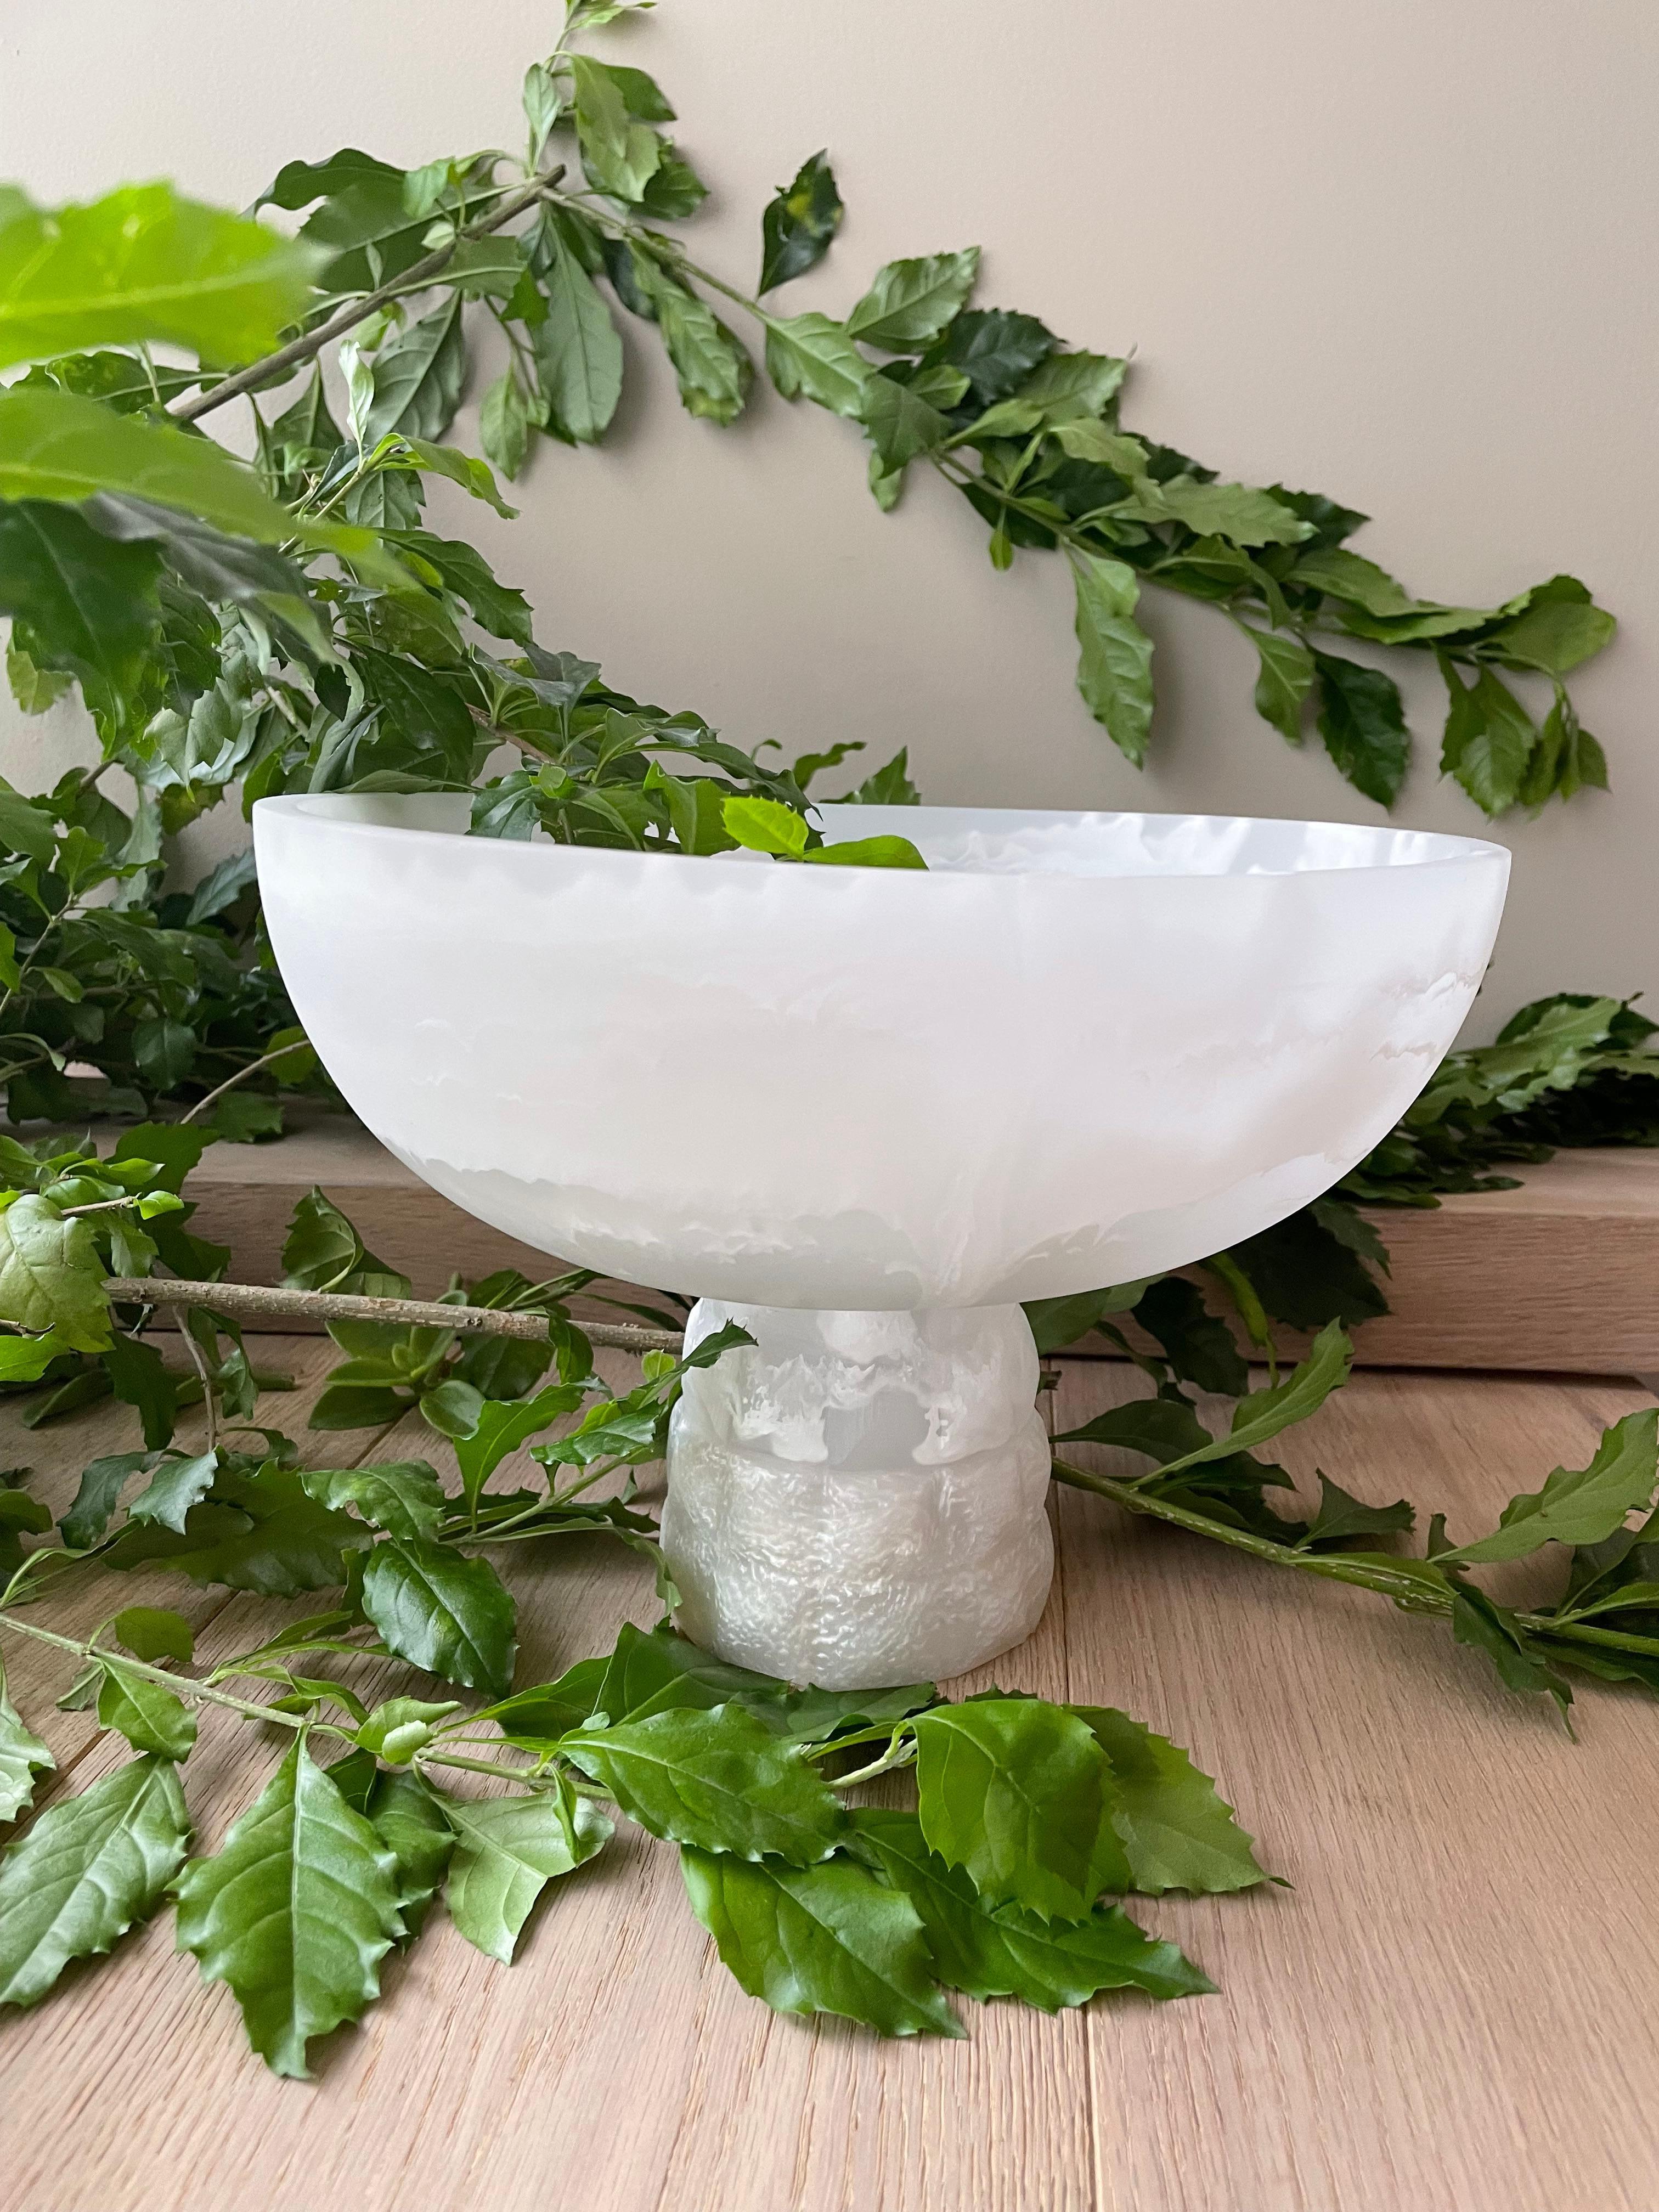 Our decorative geometric pedestal bowl is great for holding fruit, plants, decorative objects, faux succulents and specially everyone's attention. You can have it on display on a kitchen counter or use it as a centerpiece on a dining table, the